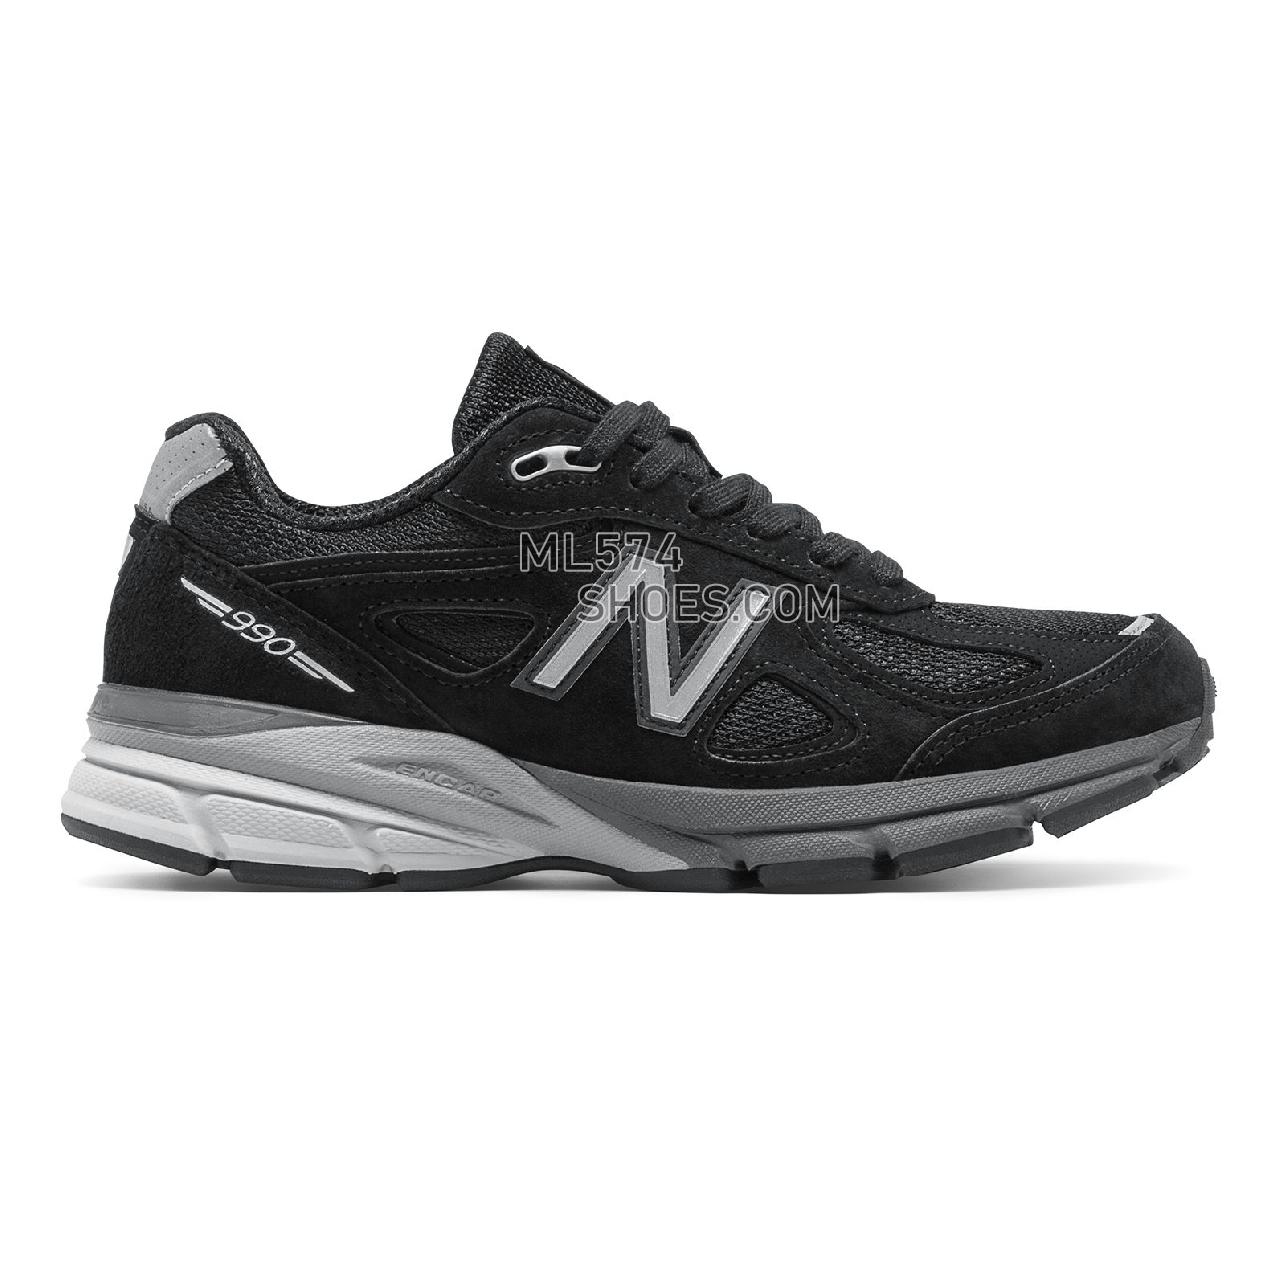 New Balance Womens 990v4 Made in US - Women's 990 - Running Black with Silver - W990BK4